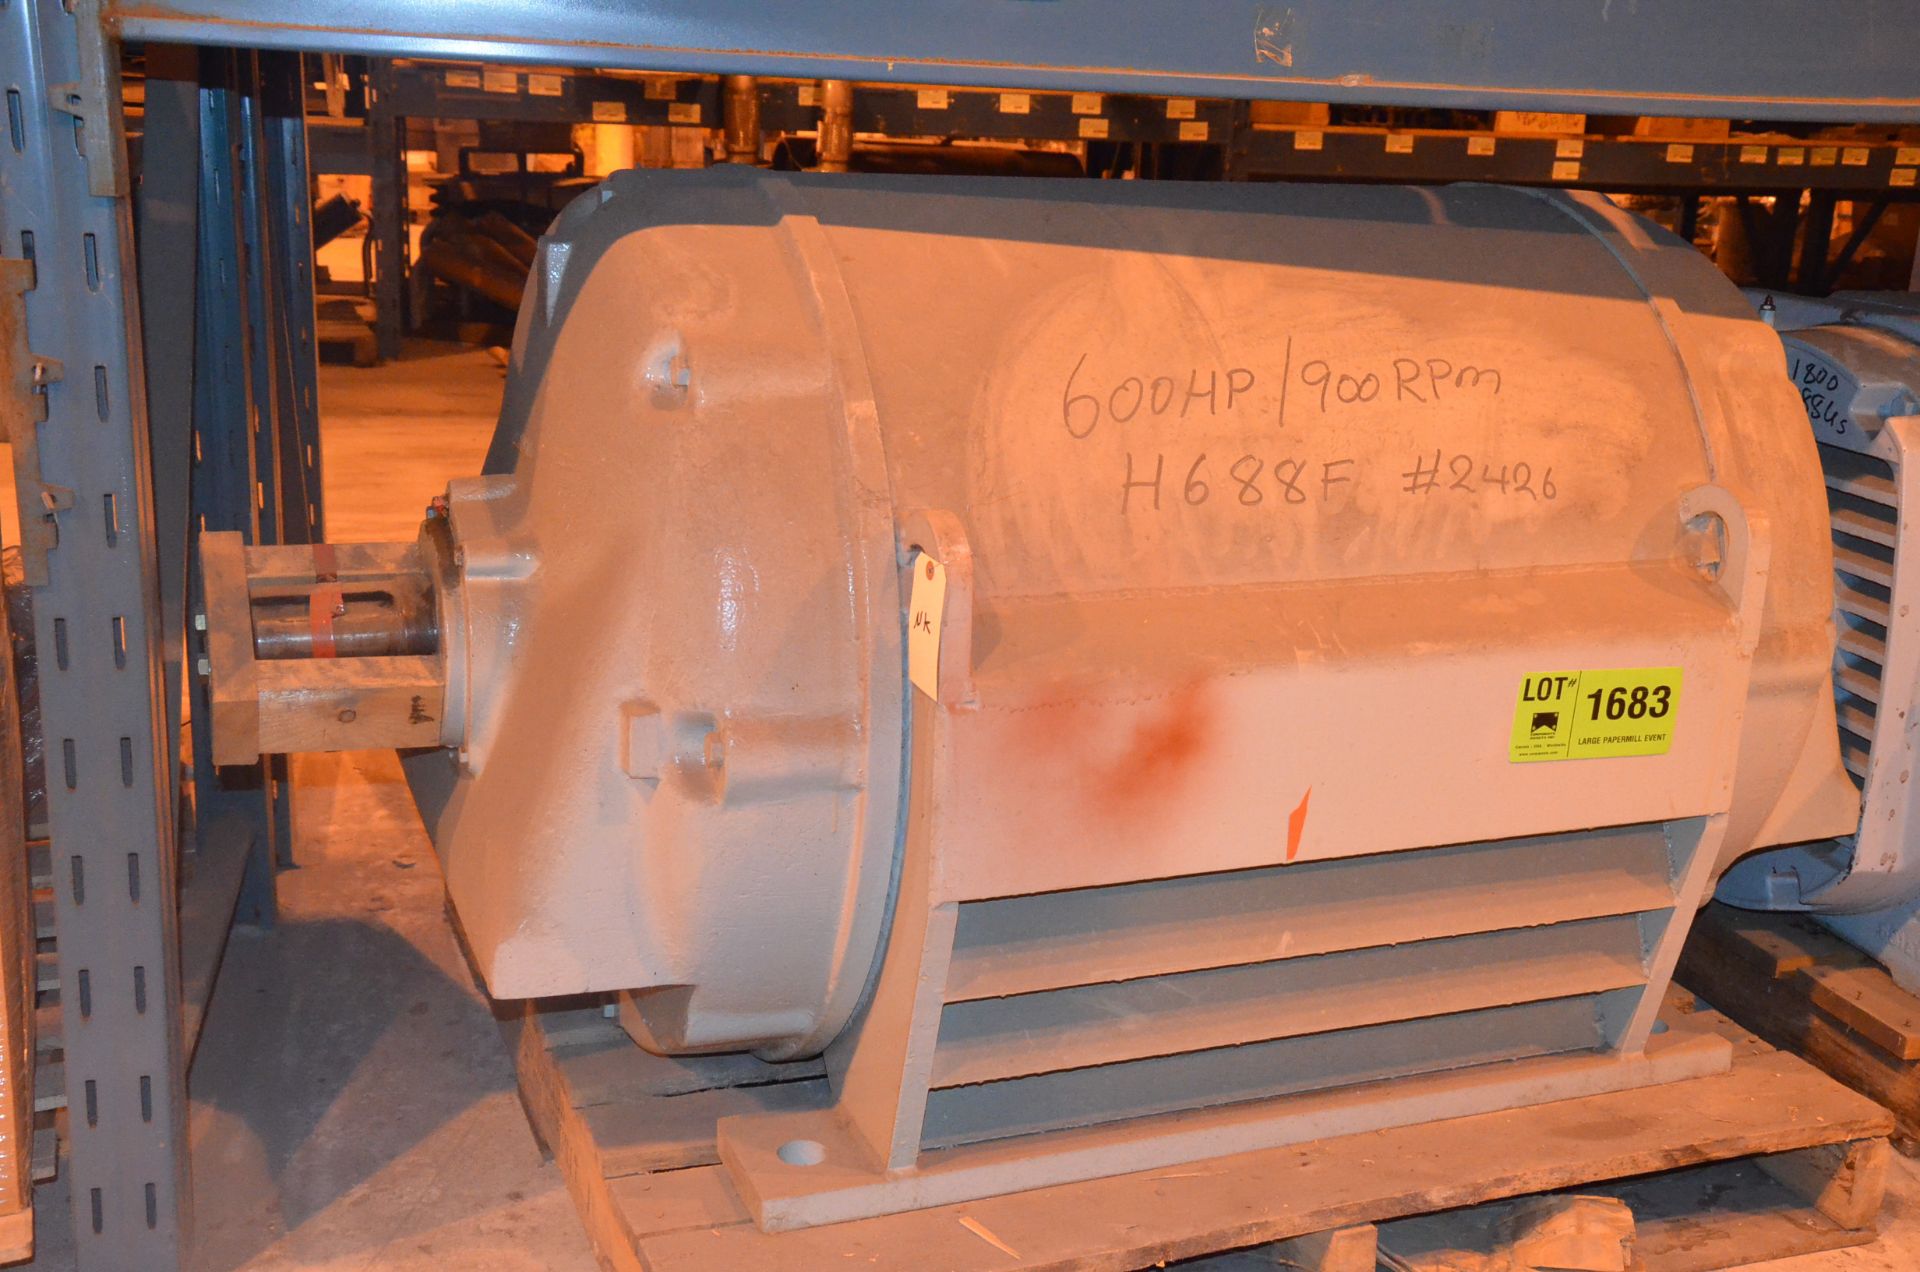 WESTINGHOUSE 600HP/886RPM/2500V ELECTRIC MOTOR, S/N N/A [RIGGING FEES FOR LOT #1683 - $60 USD PLUS